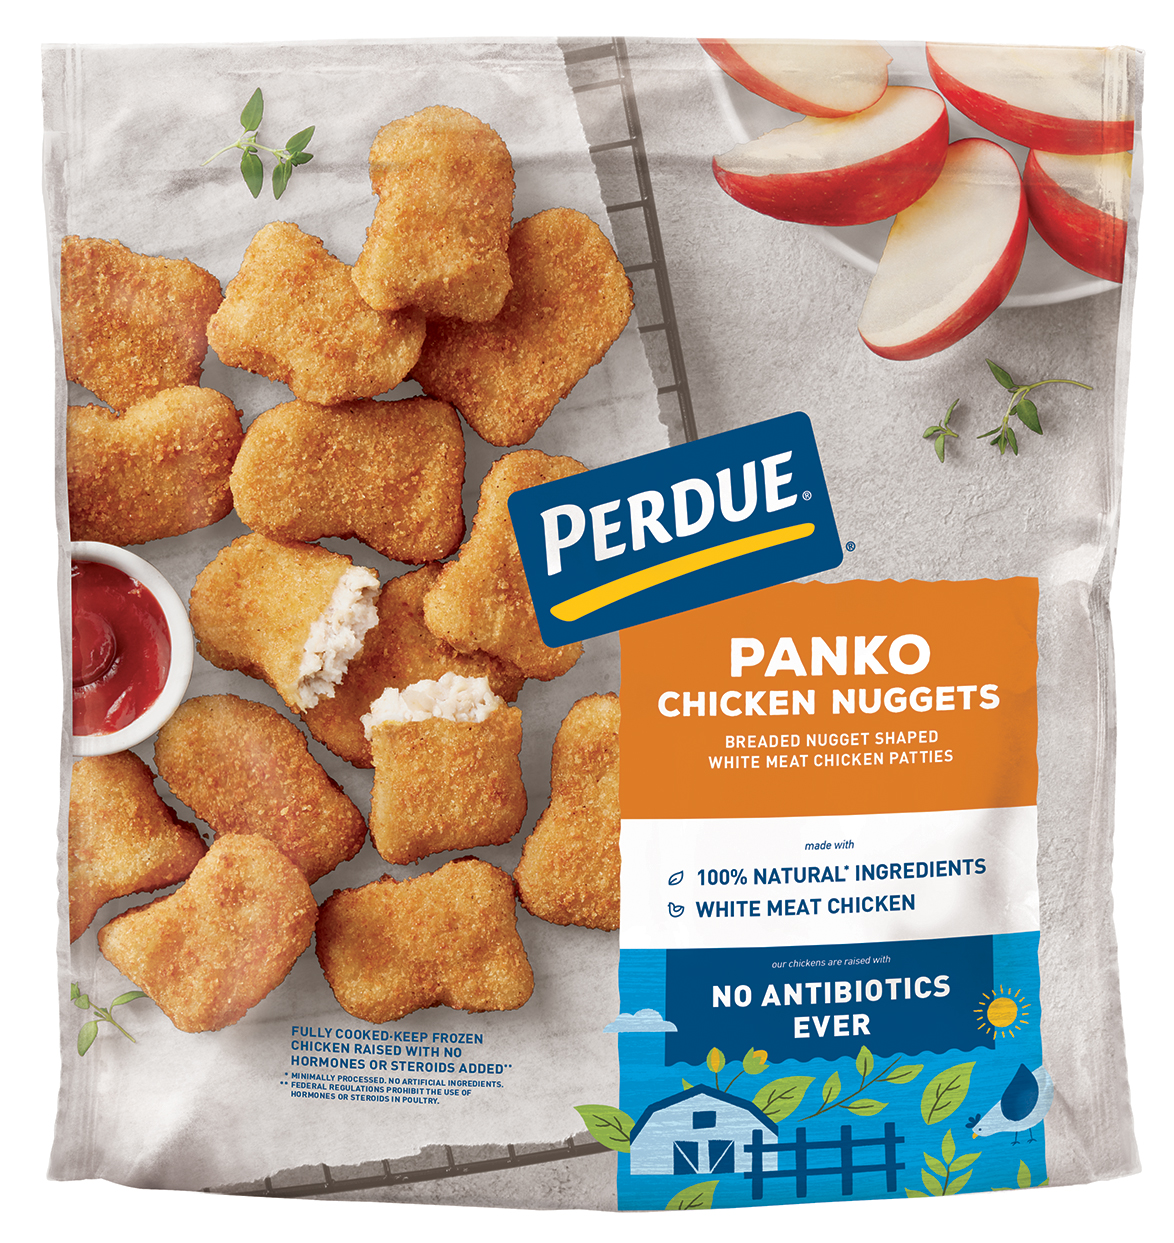 PERDUE® SHORT CUTS® Grilled Chicken Strips, 4246